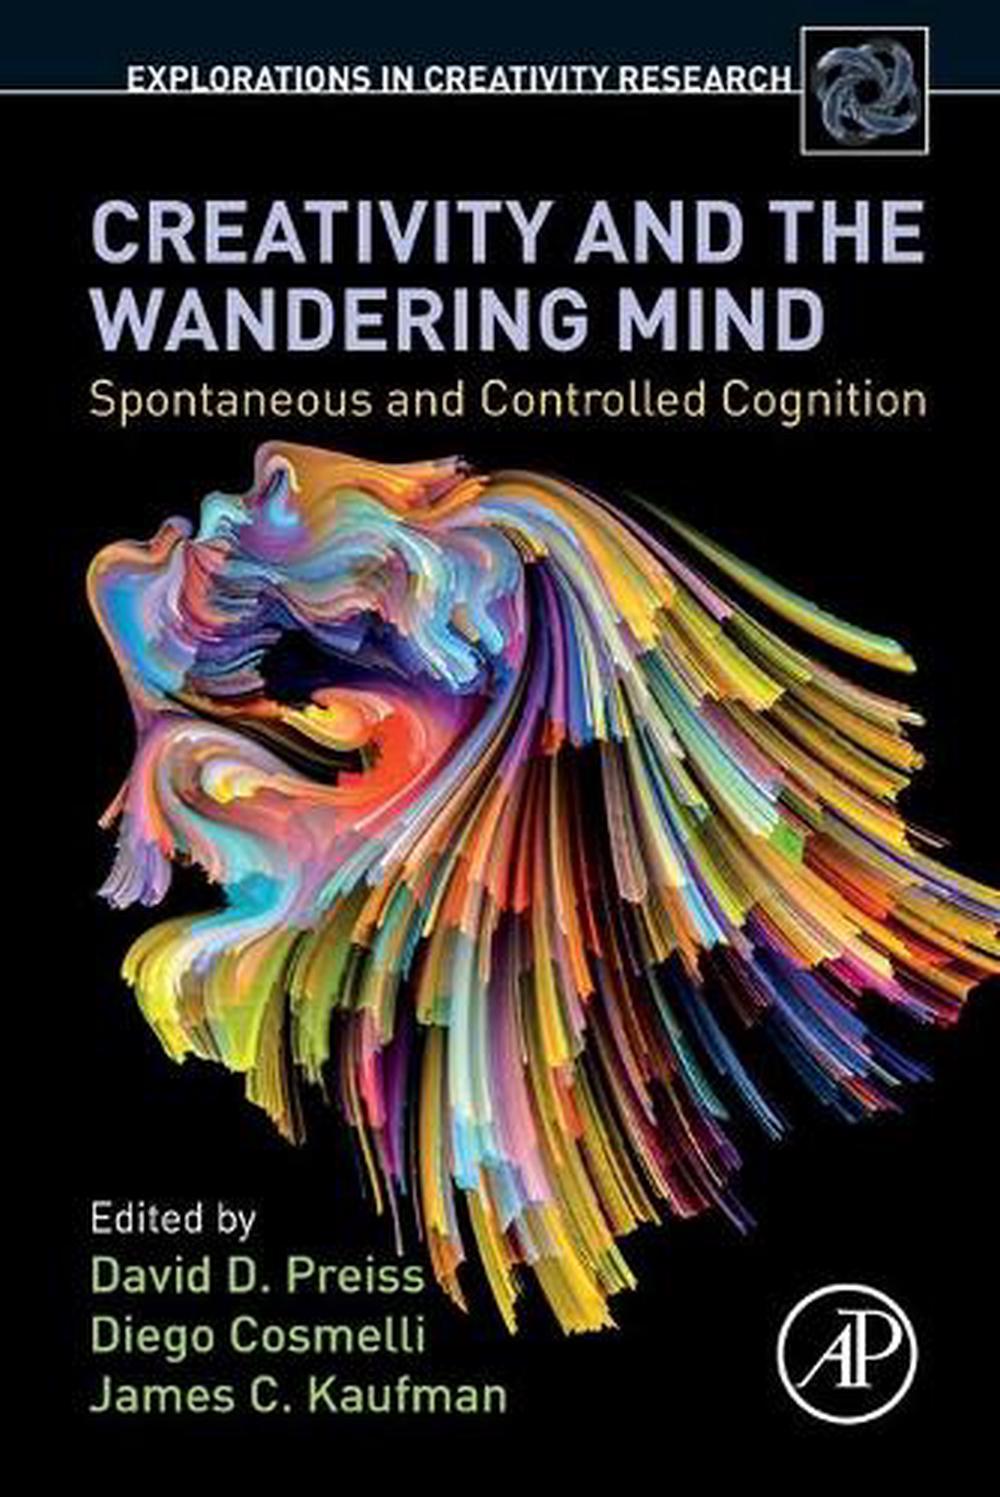 mind wandering as creative thinking neural psychological and theoretical considerations